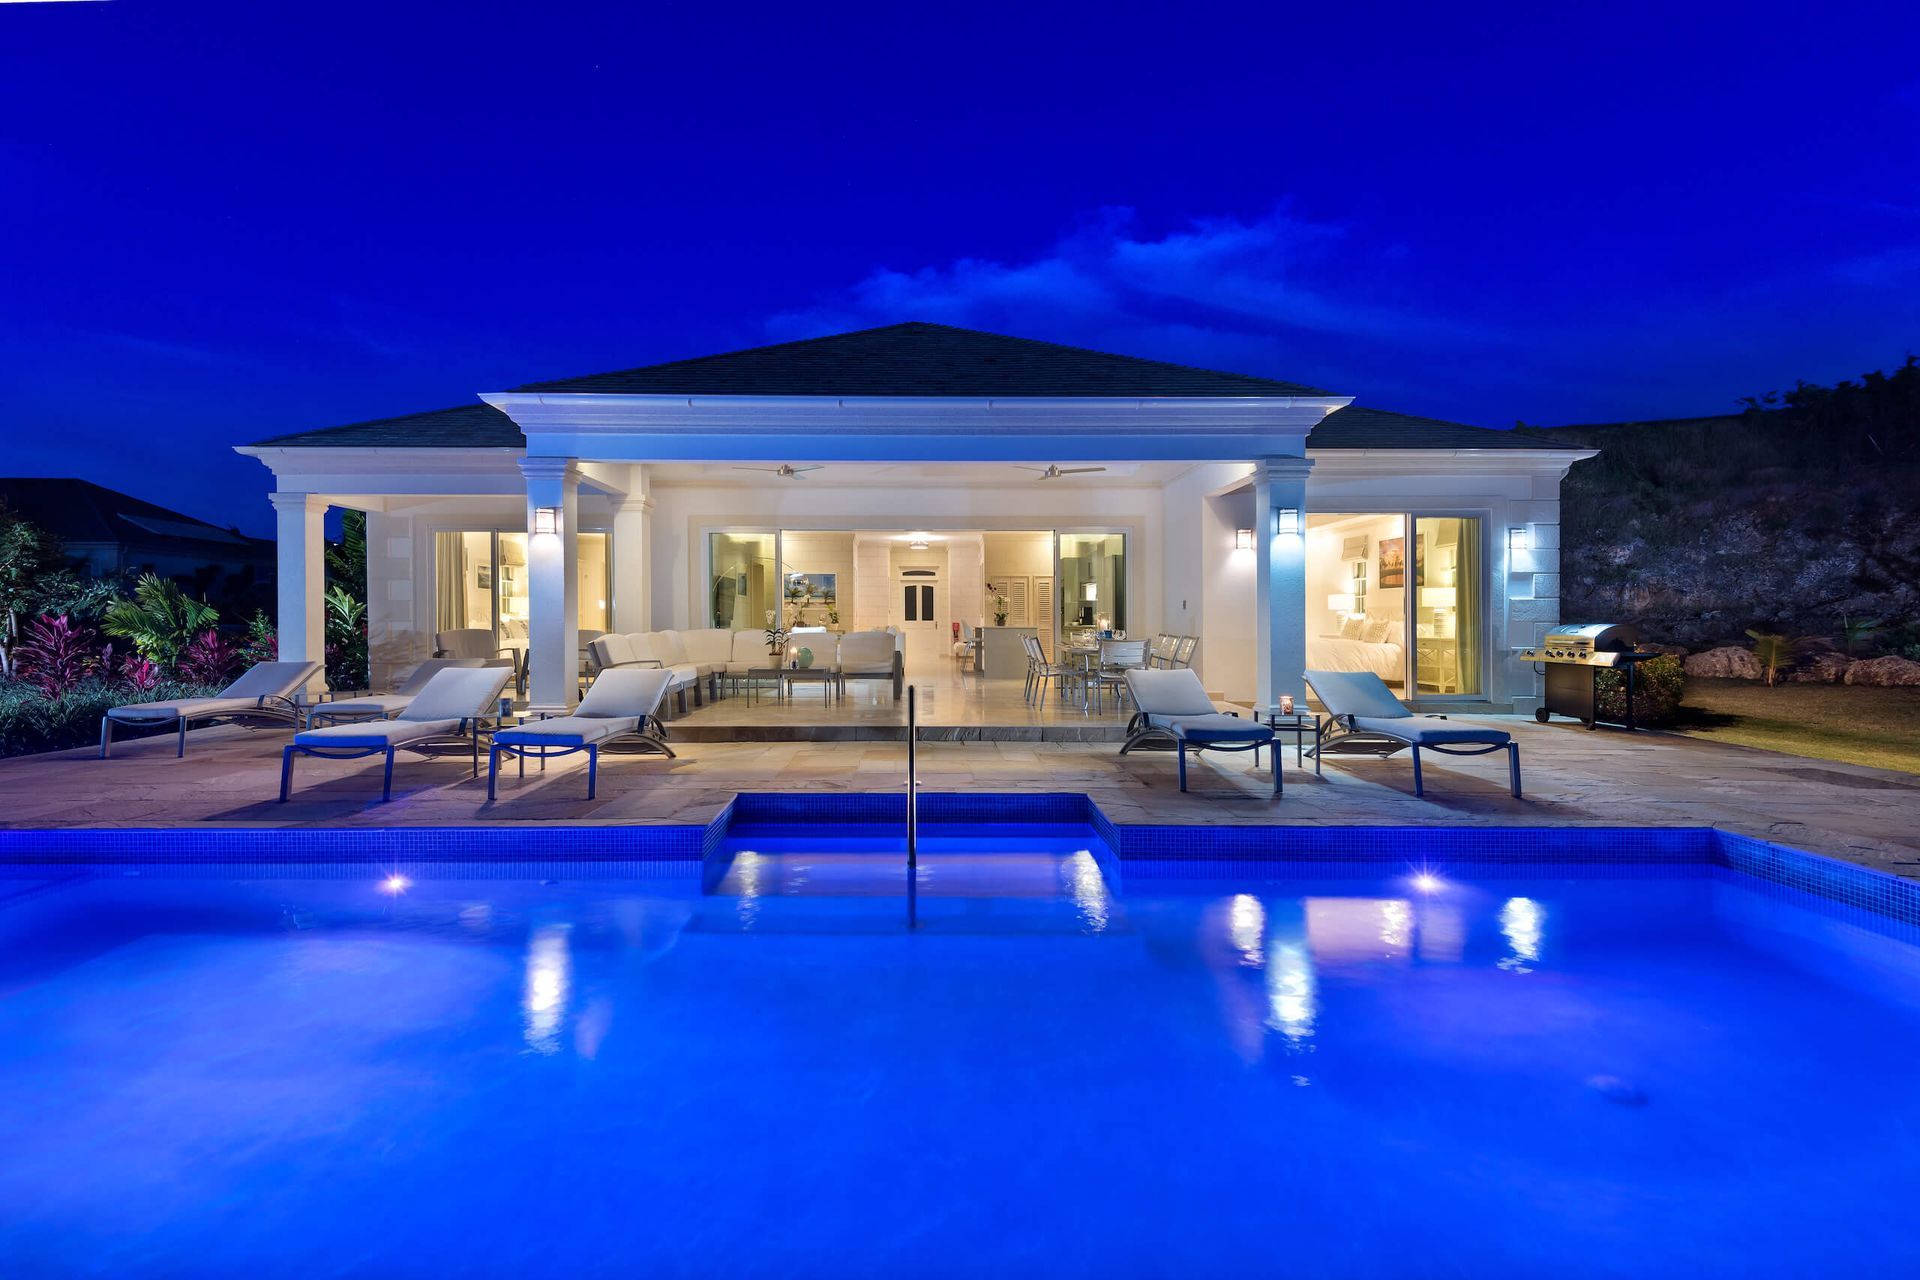 a large house with a swimming pool in front of it at night